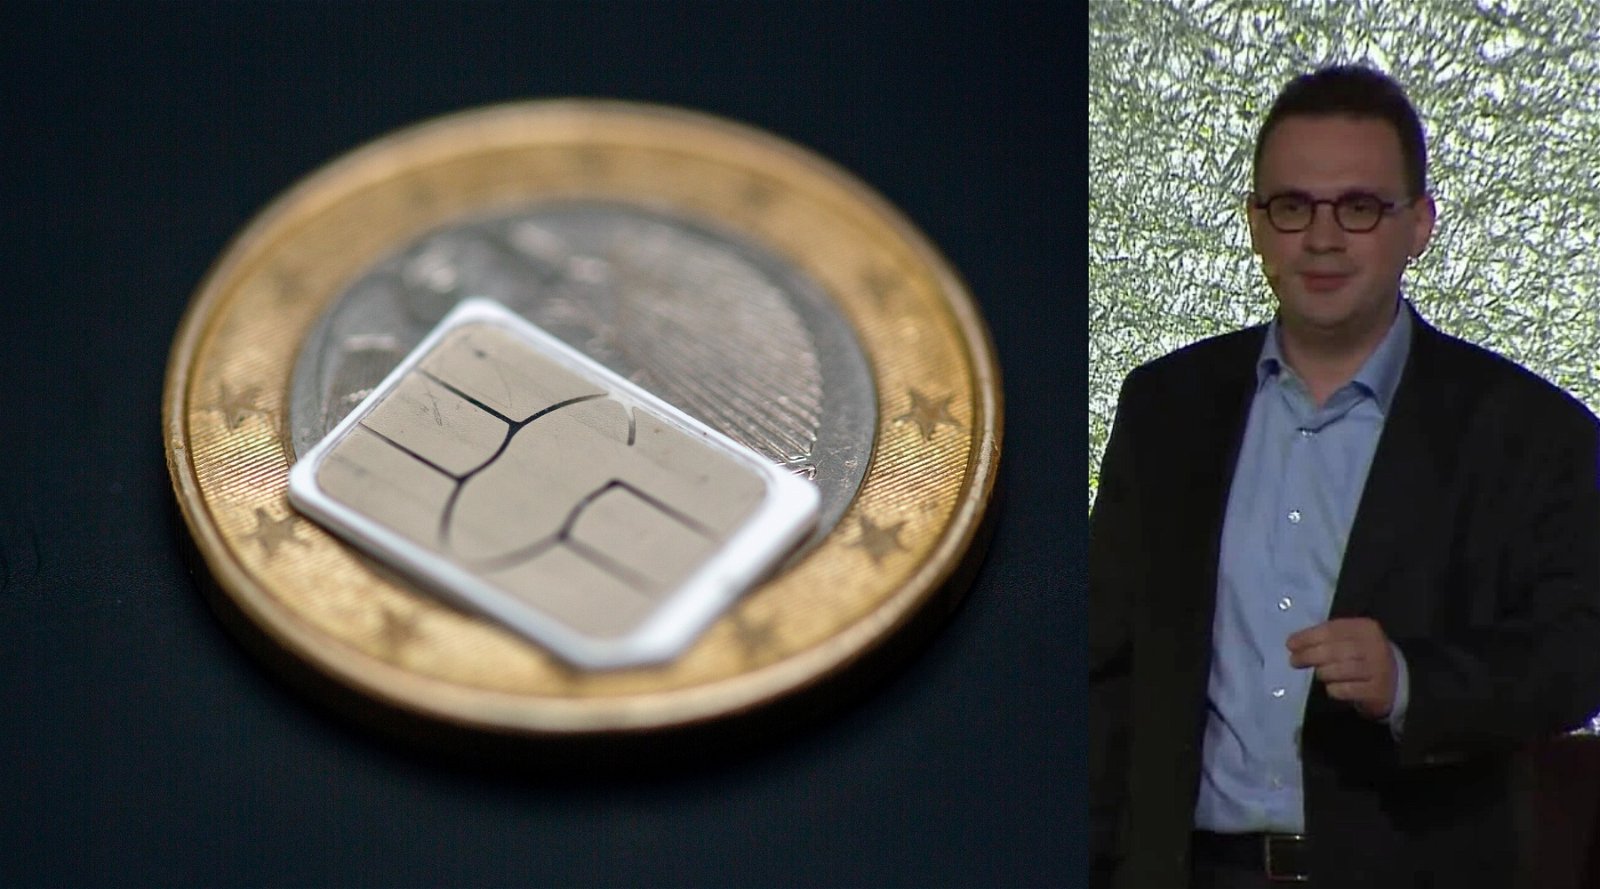 Introducing the digital euro is now ”problematic”